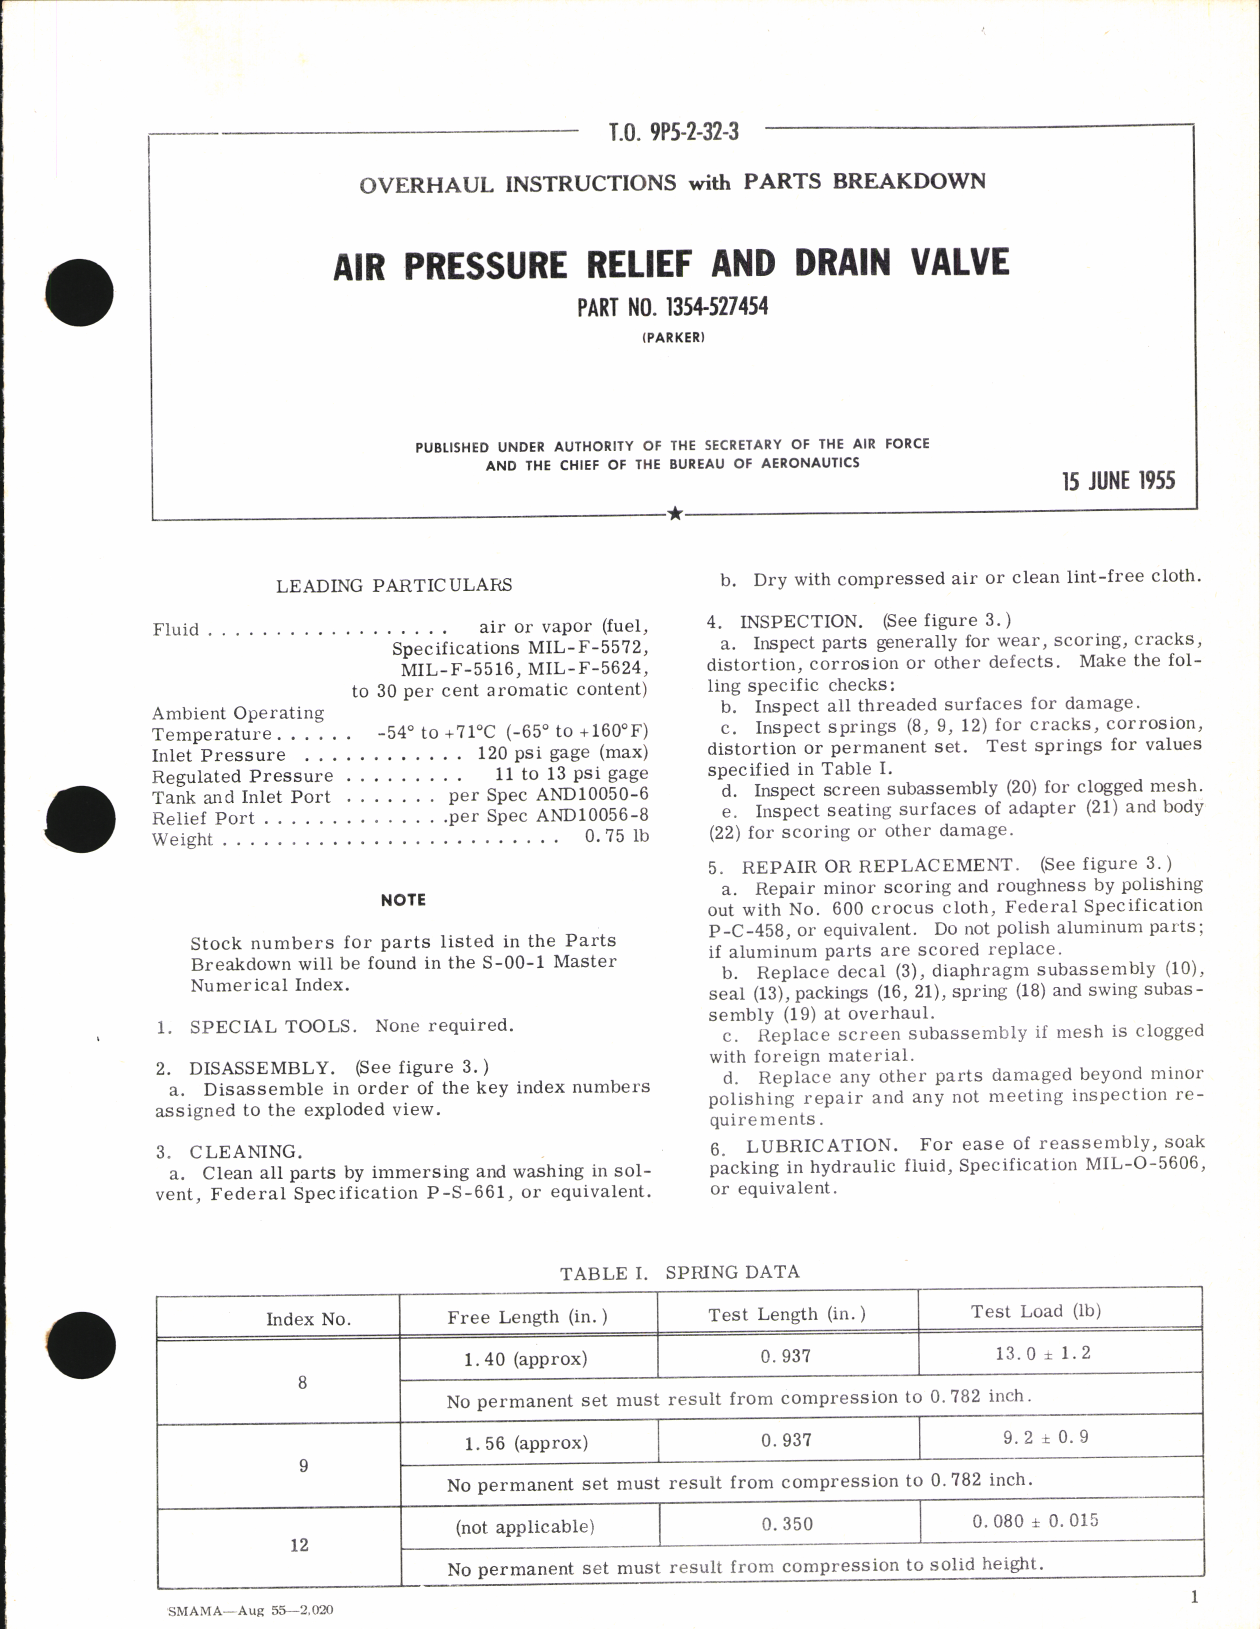 Sample page 1 from AirCorps Library document: Overhaul Instructions with Parts Breakdown for Air Pressure relief and Drain Valve Part No. 1354-527454